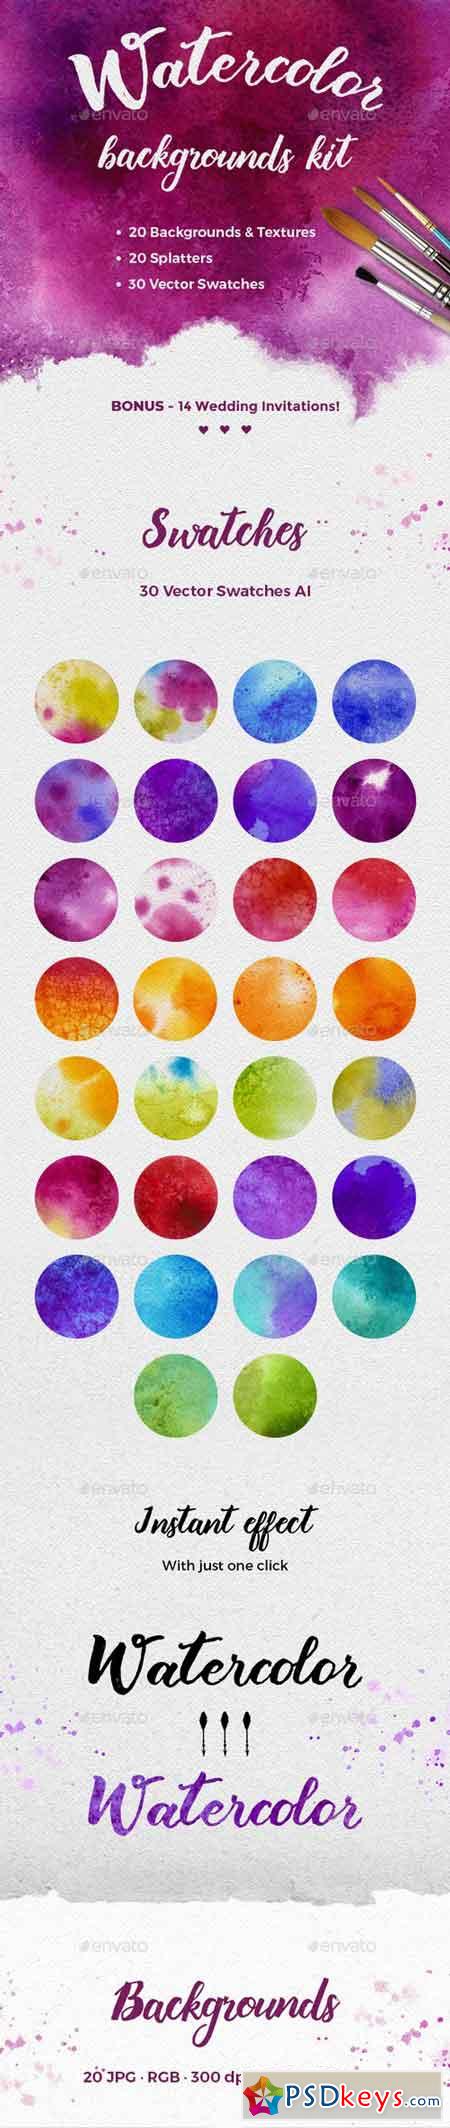 Watercolor Backgrounds Kit 21774505